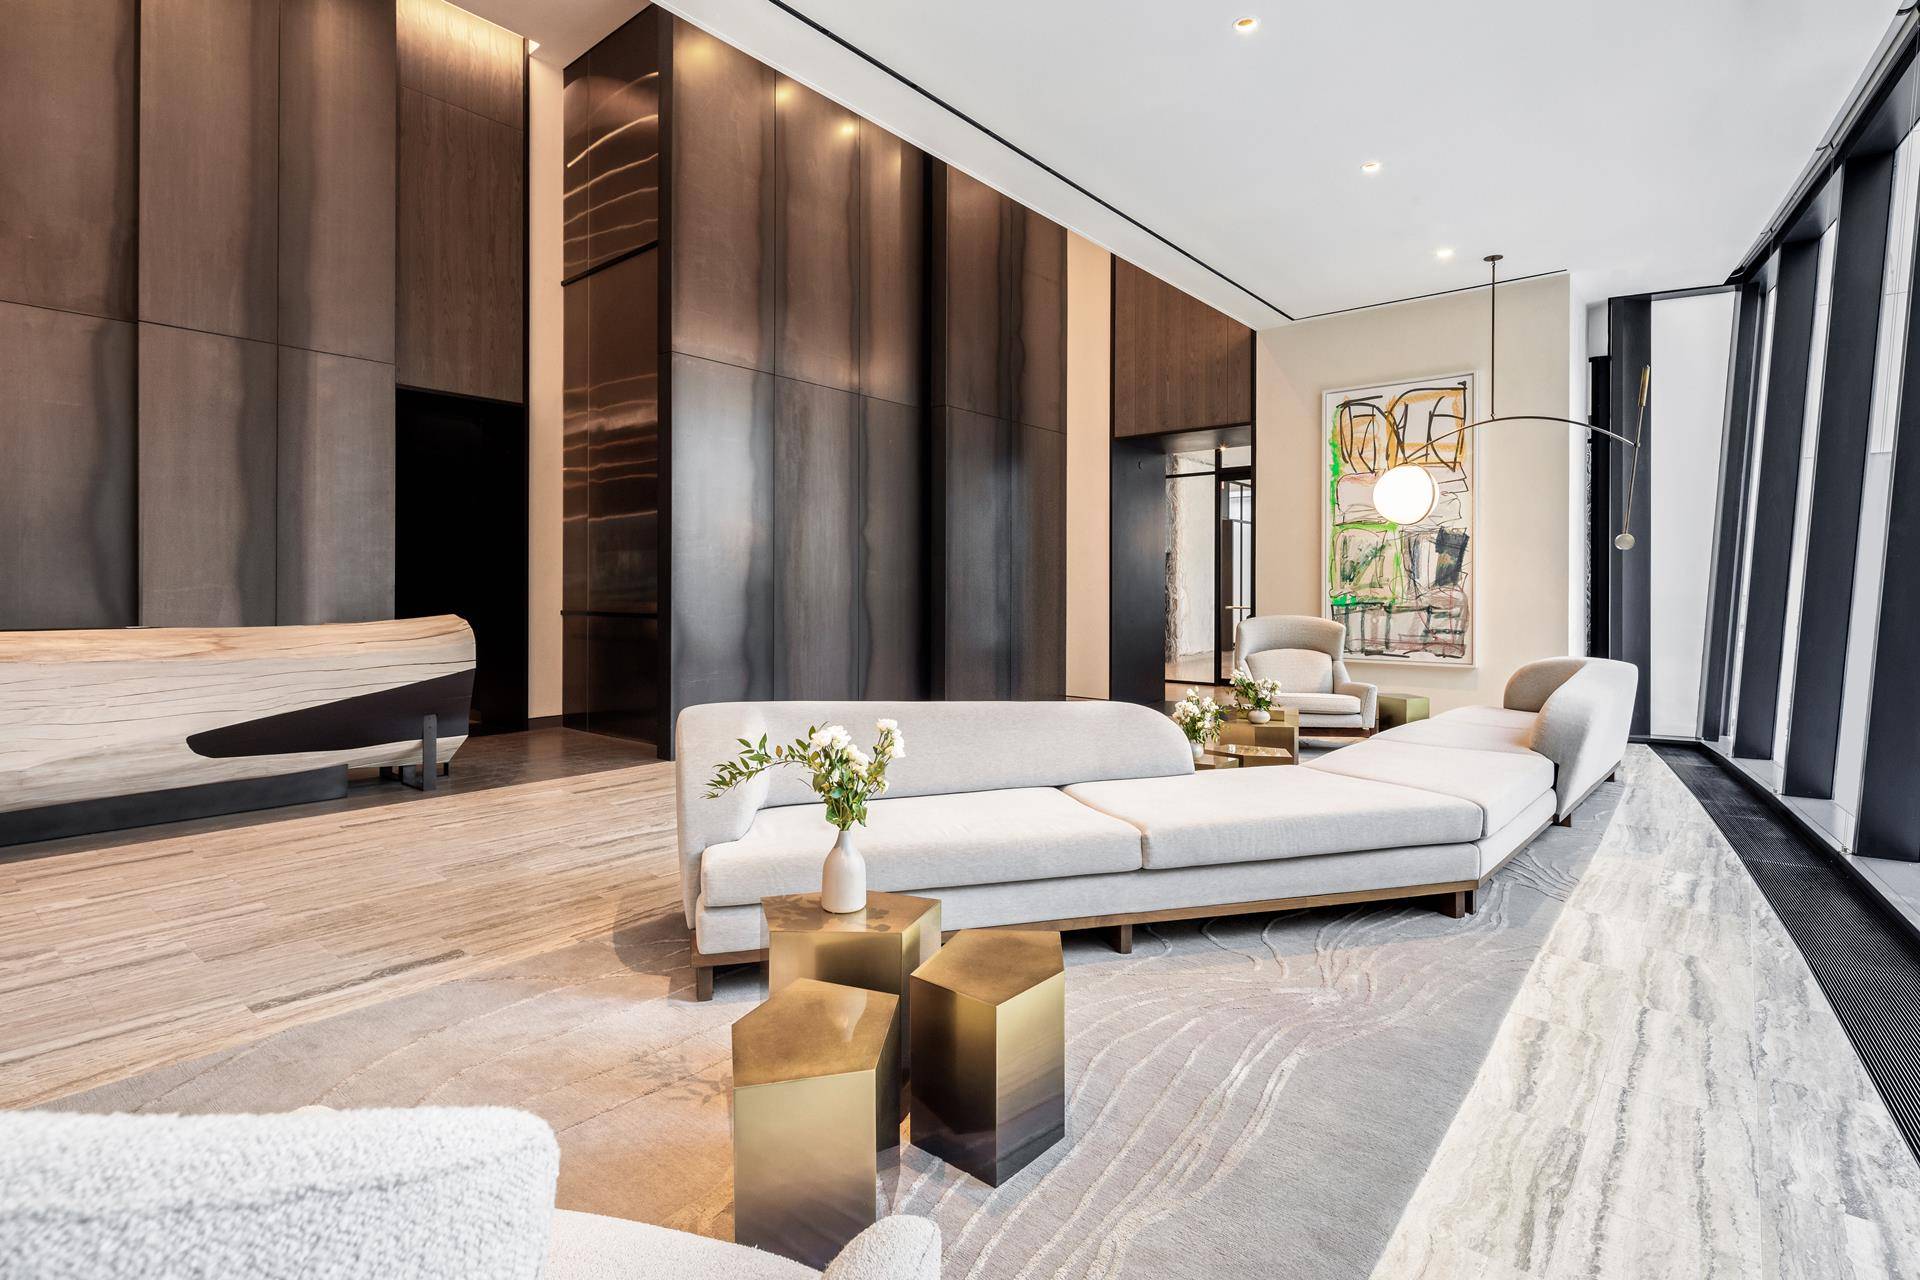 At 2, 876 square feet, this meticulously designed 3 bedroom, 4.